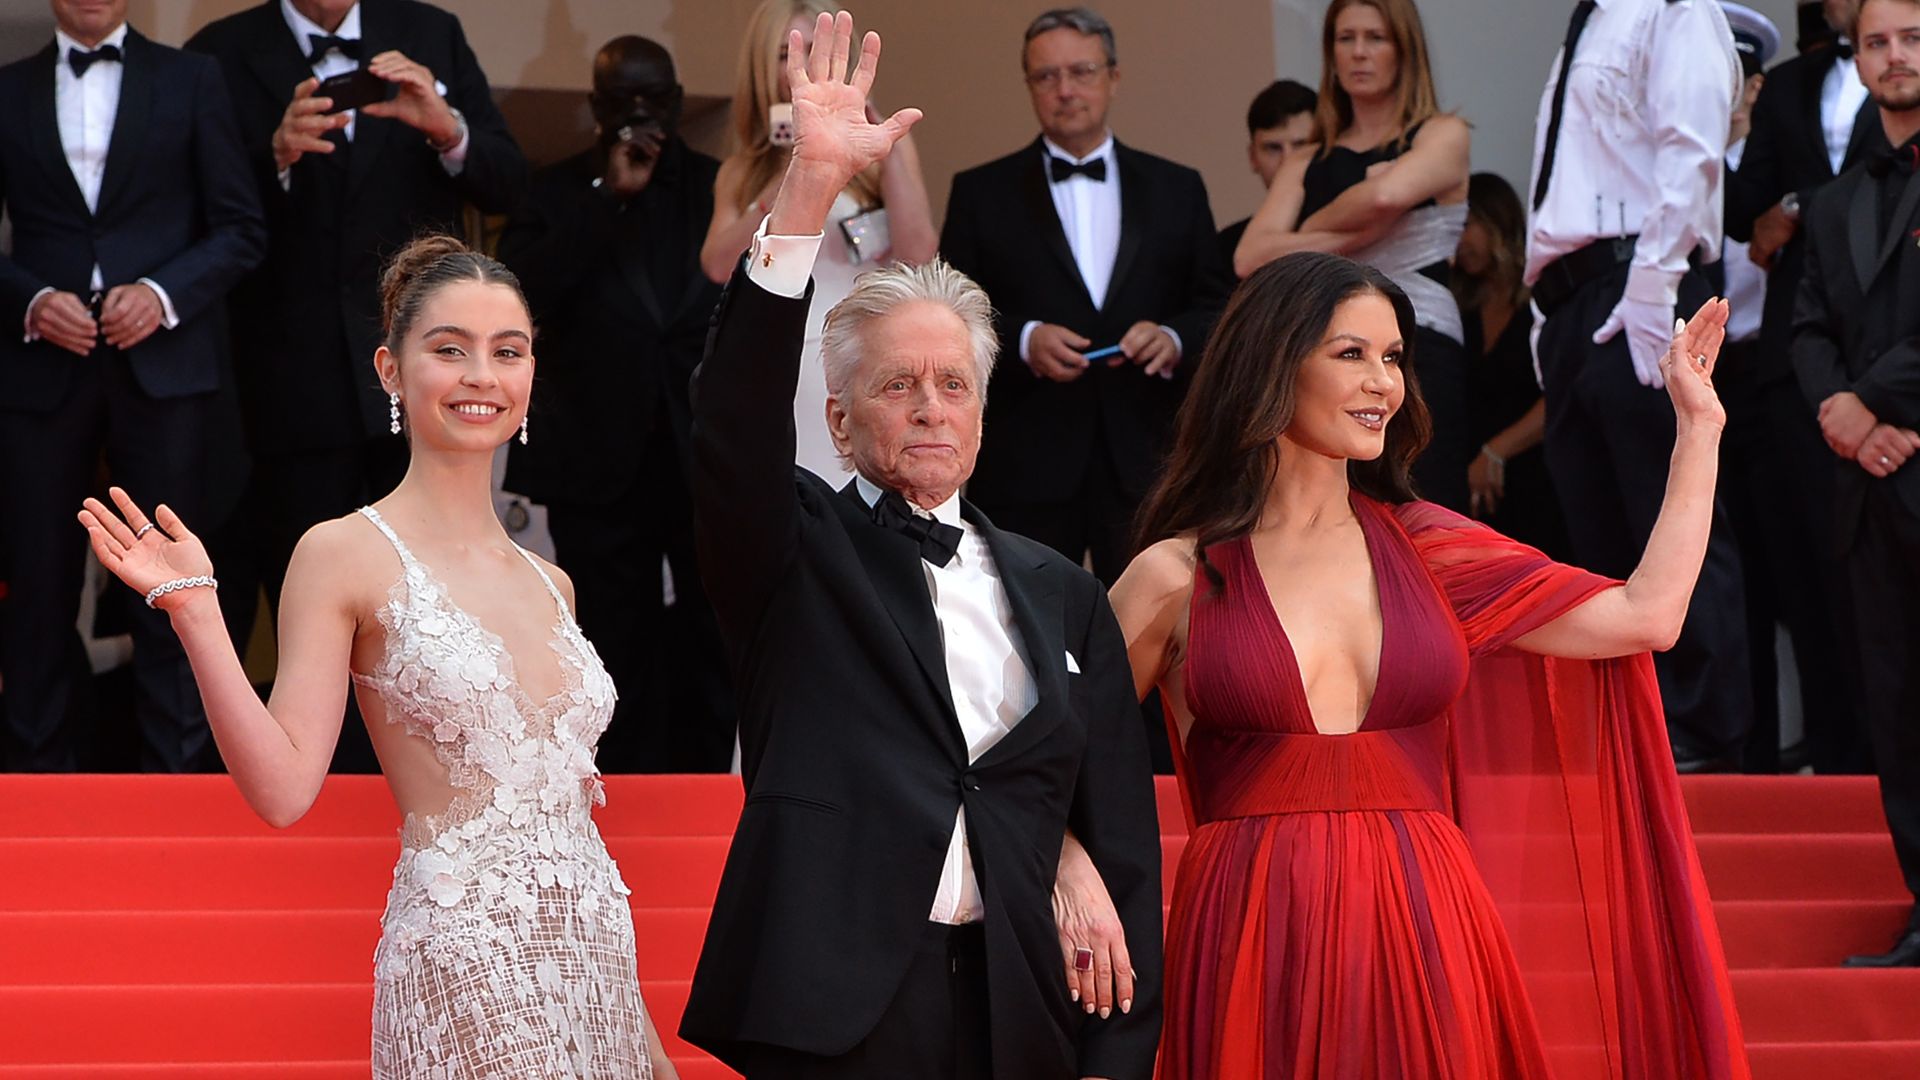 Catherine Zeta-Jones and Michael Douglas' daughter reveals she's following in famous family's acting footsteps